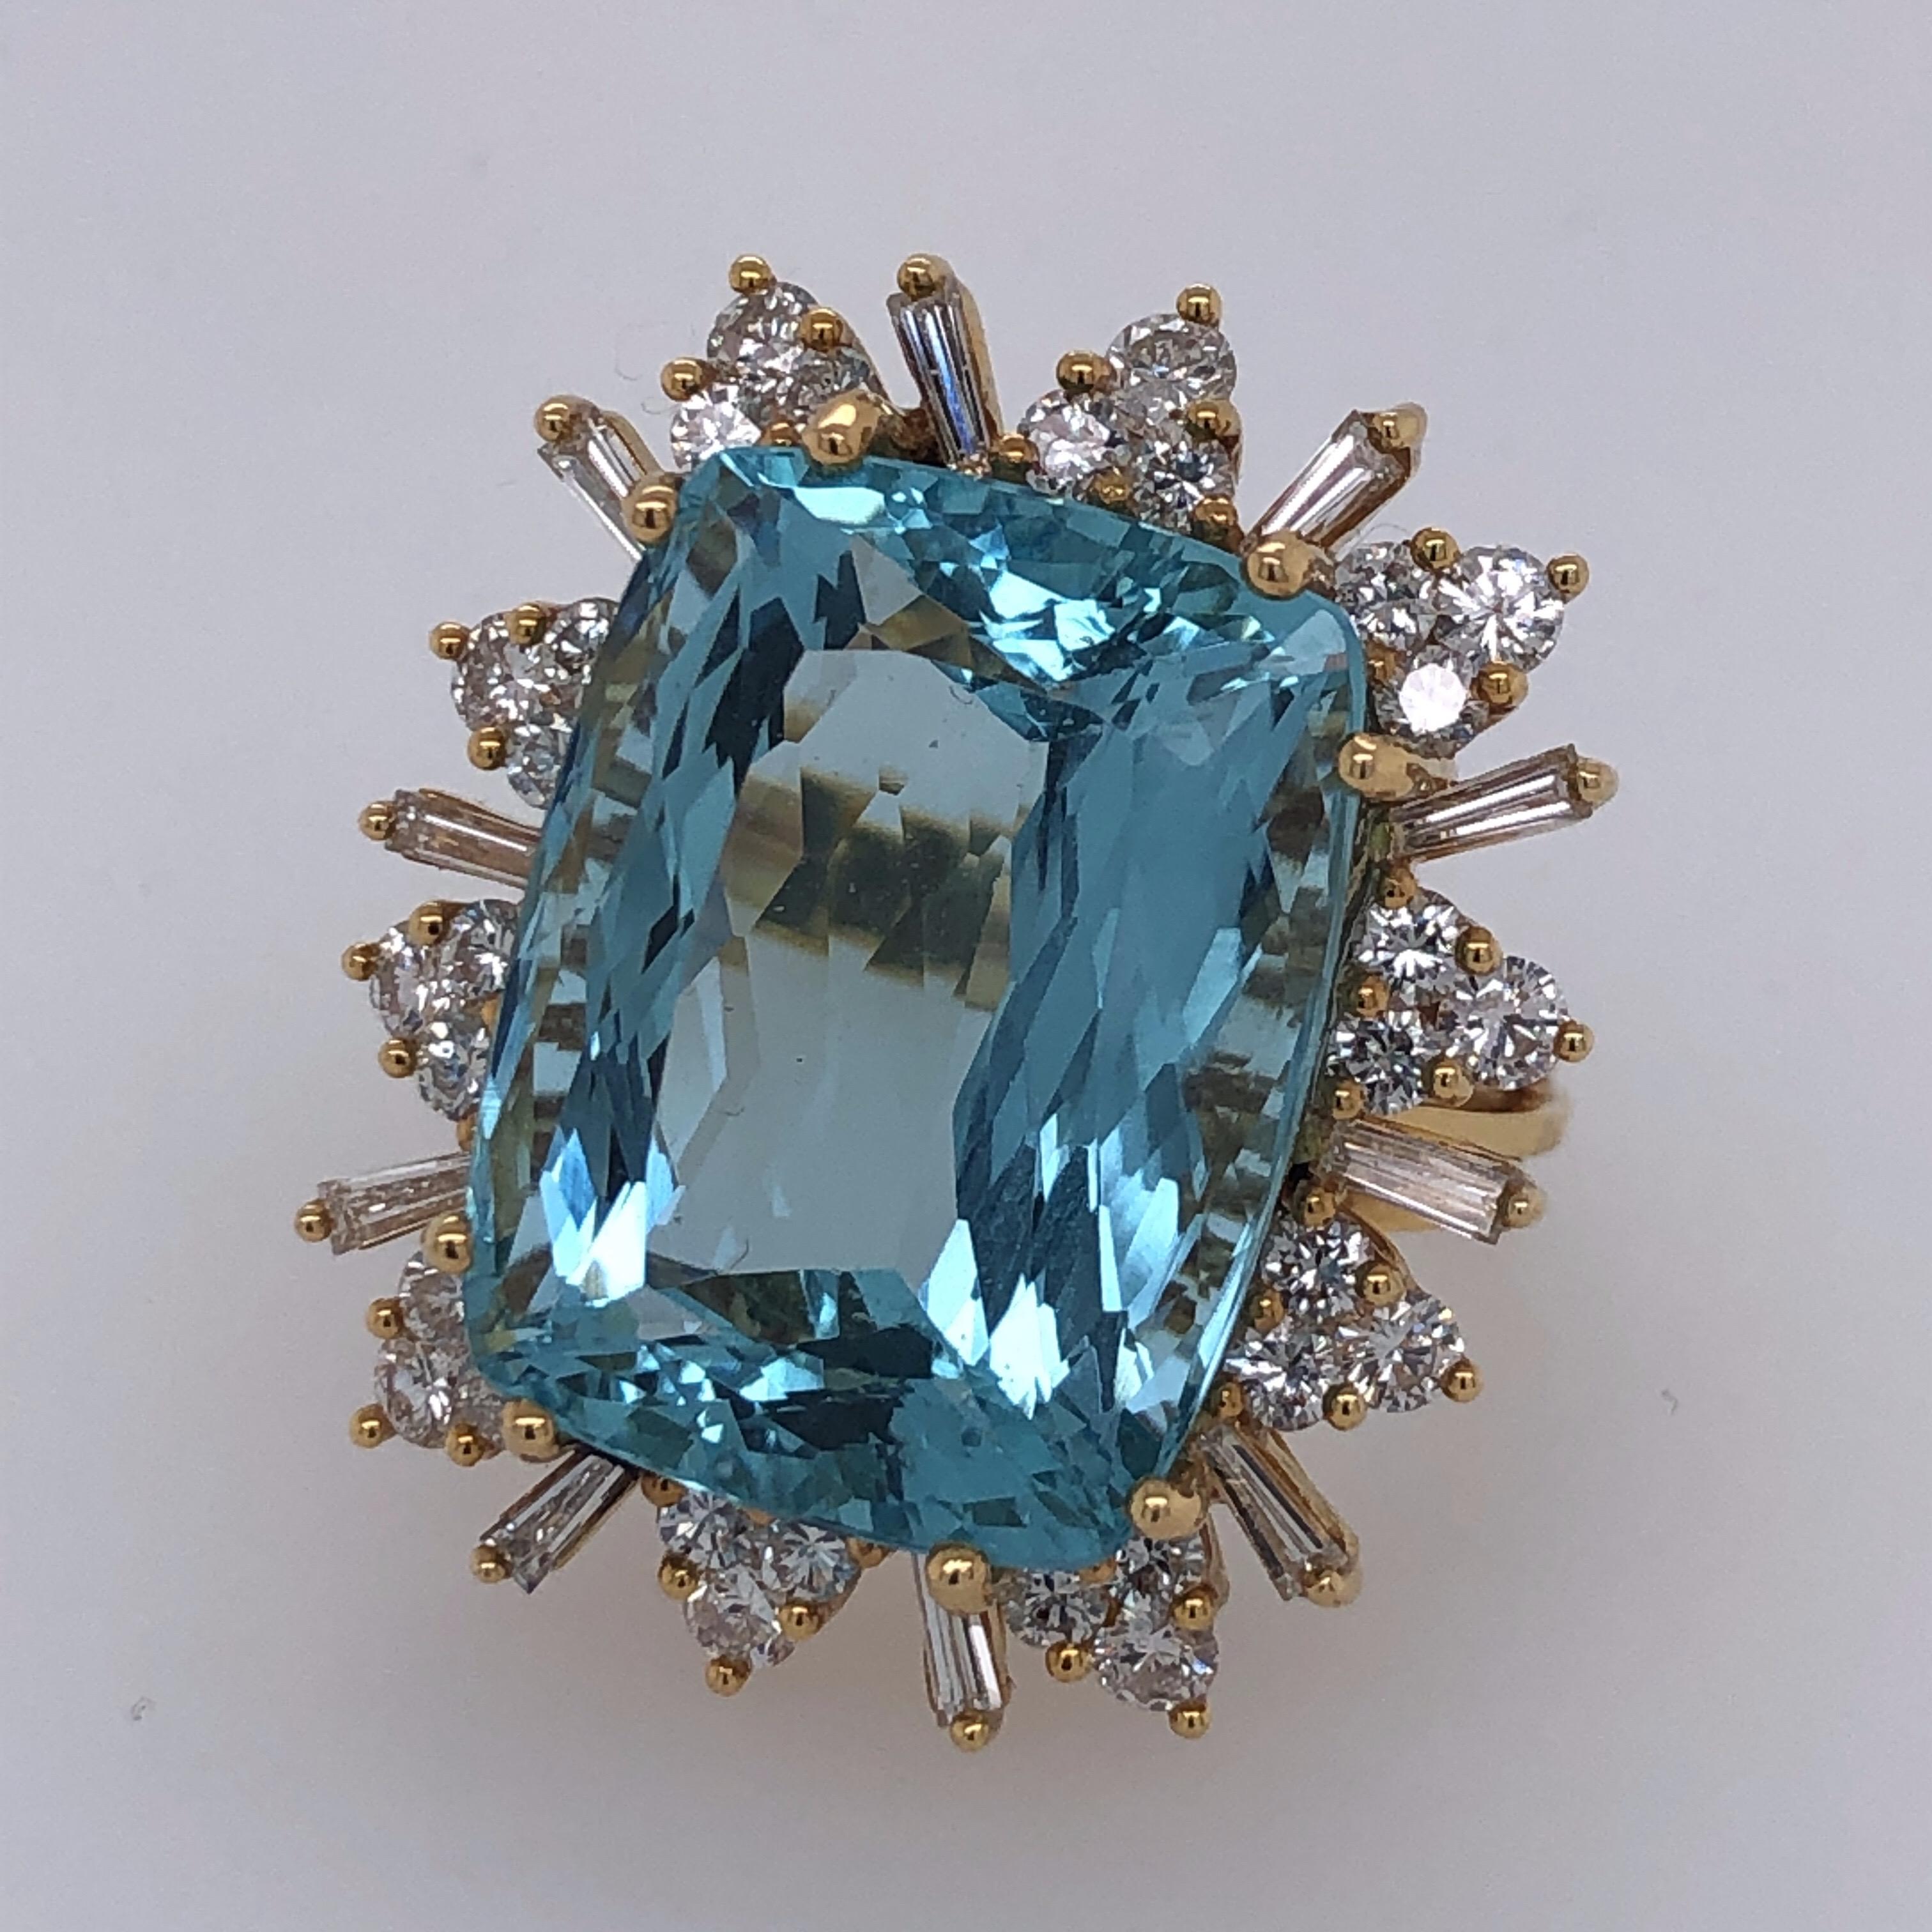 Lady's 18K yellow gold aquamarine and diamond fashion ring containing one approximately 25 carats cushion-cut aquamarine , 10 tapered baguette-cut diamonds approximately 3/4 carat total weight and 30 round full-out diamonds approximately 1-1/2